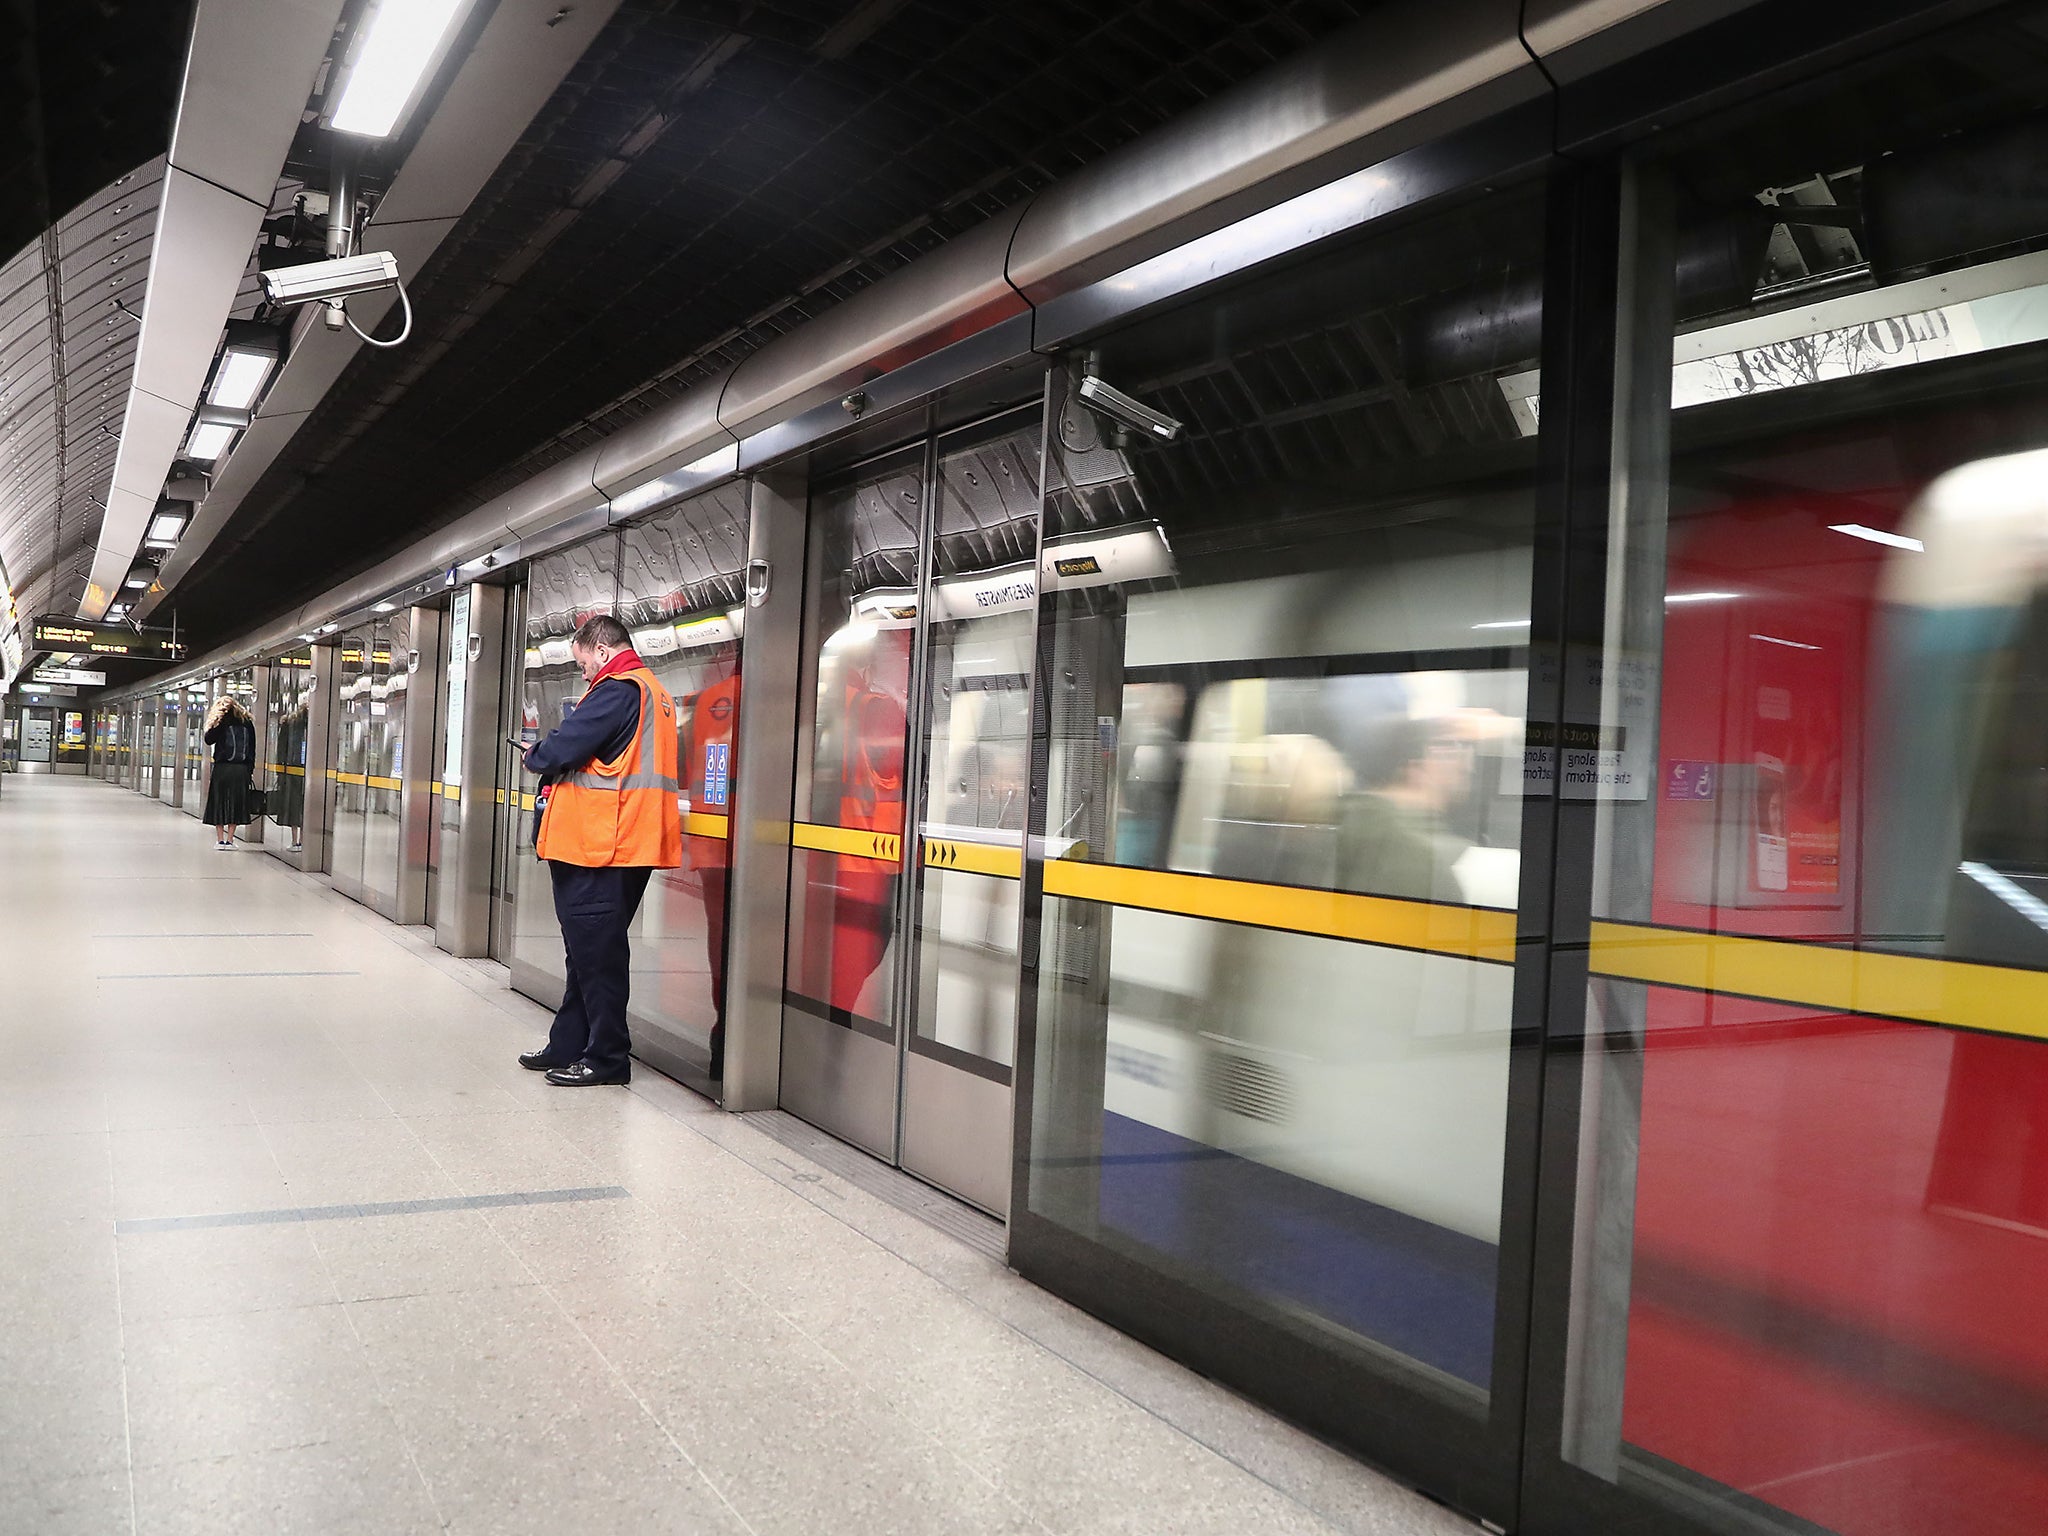 An American rode London's Underground system for a week ...